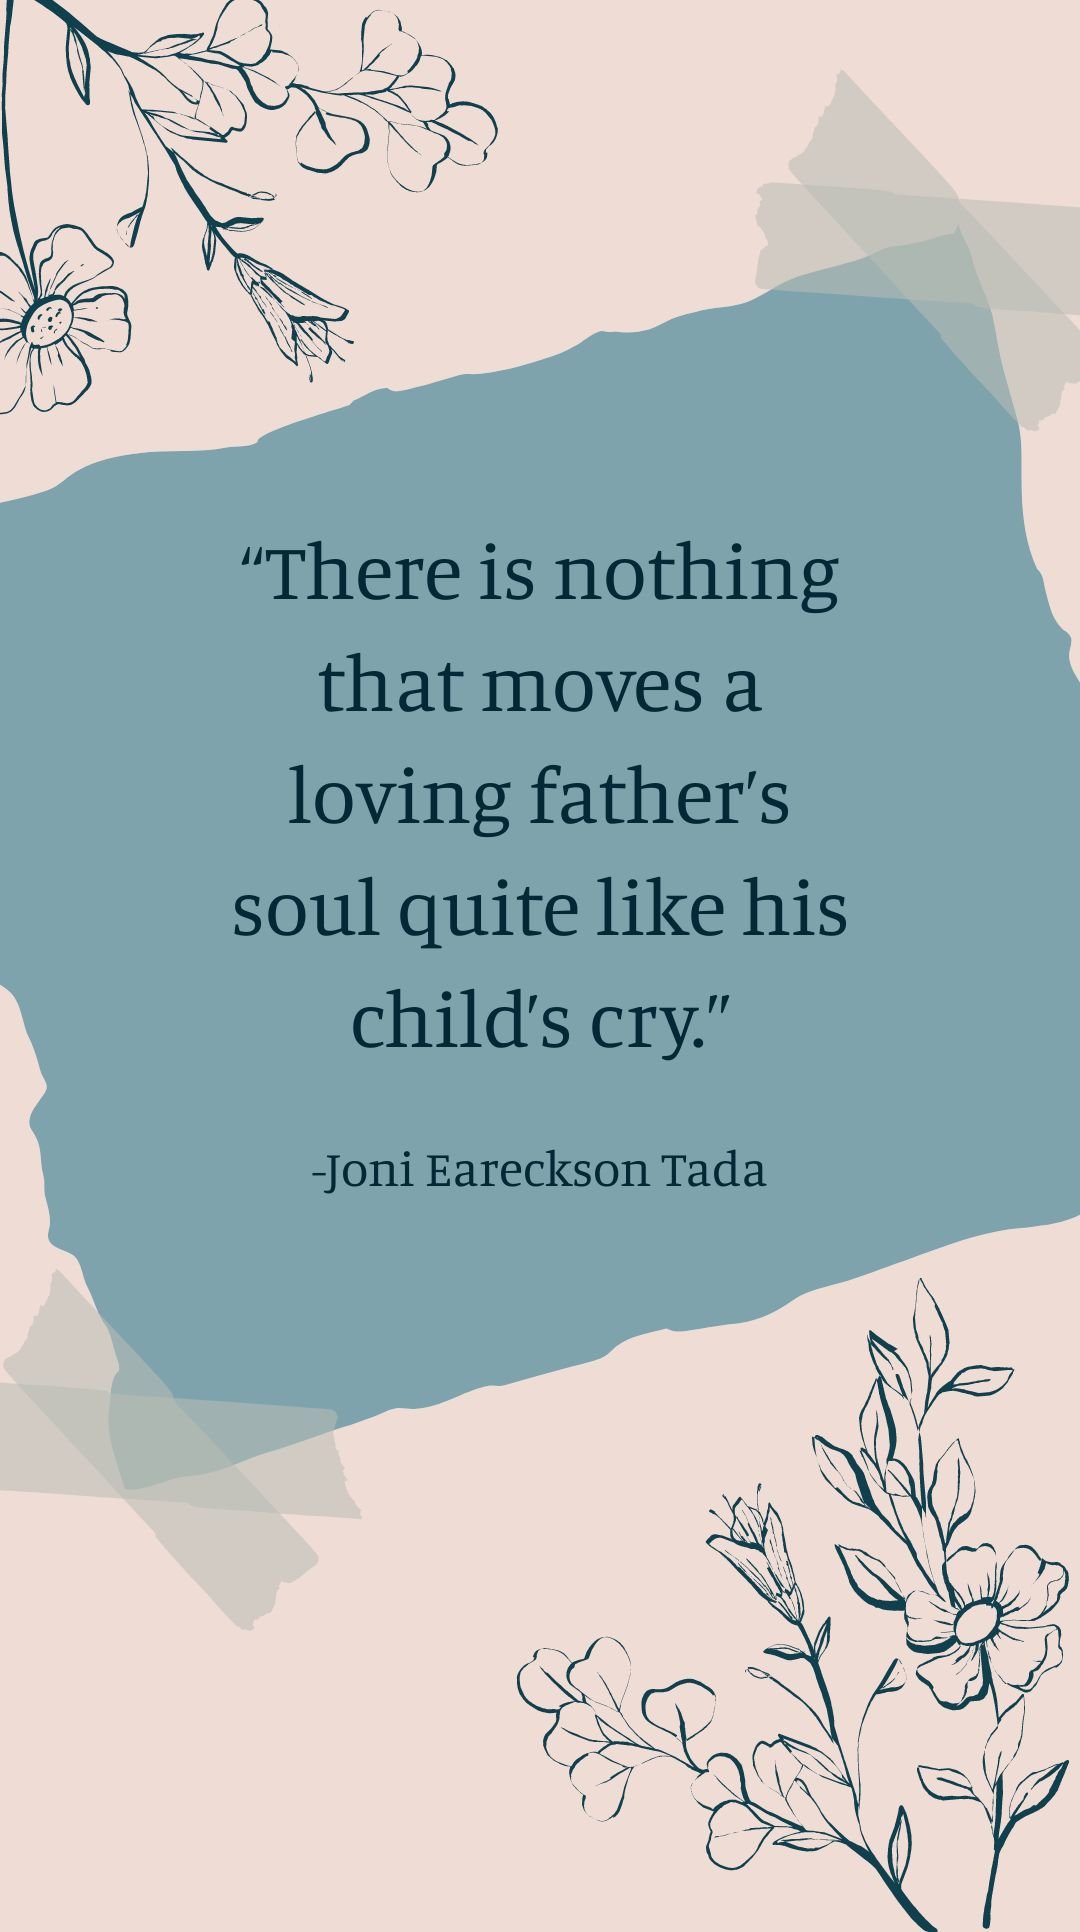 Free Joni Eareckson Tada - There is nothing that moves a loving father’s soul quite like his child’s cry. in JPG